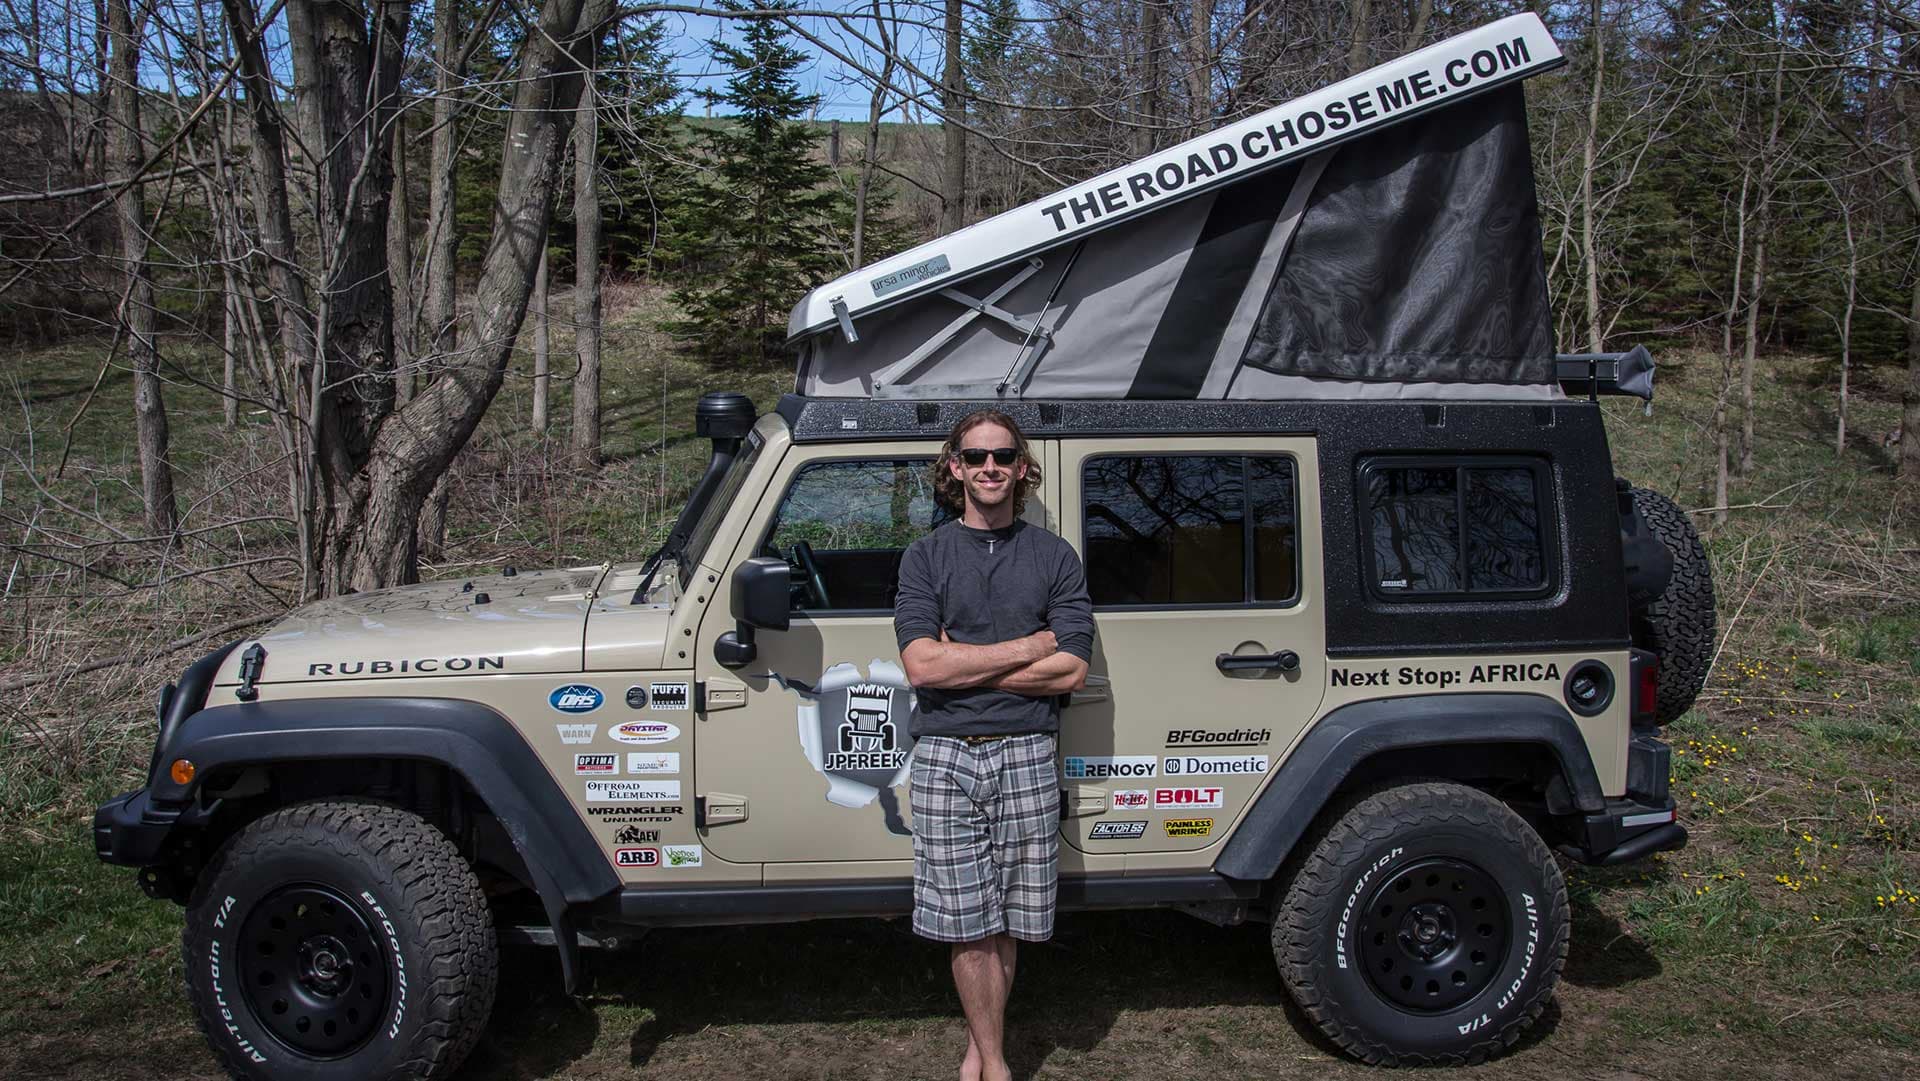 Check Out This Custom Jeep Wrangler Built To Conquer Africa’s Terrain